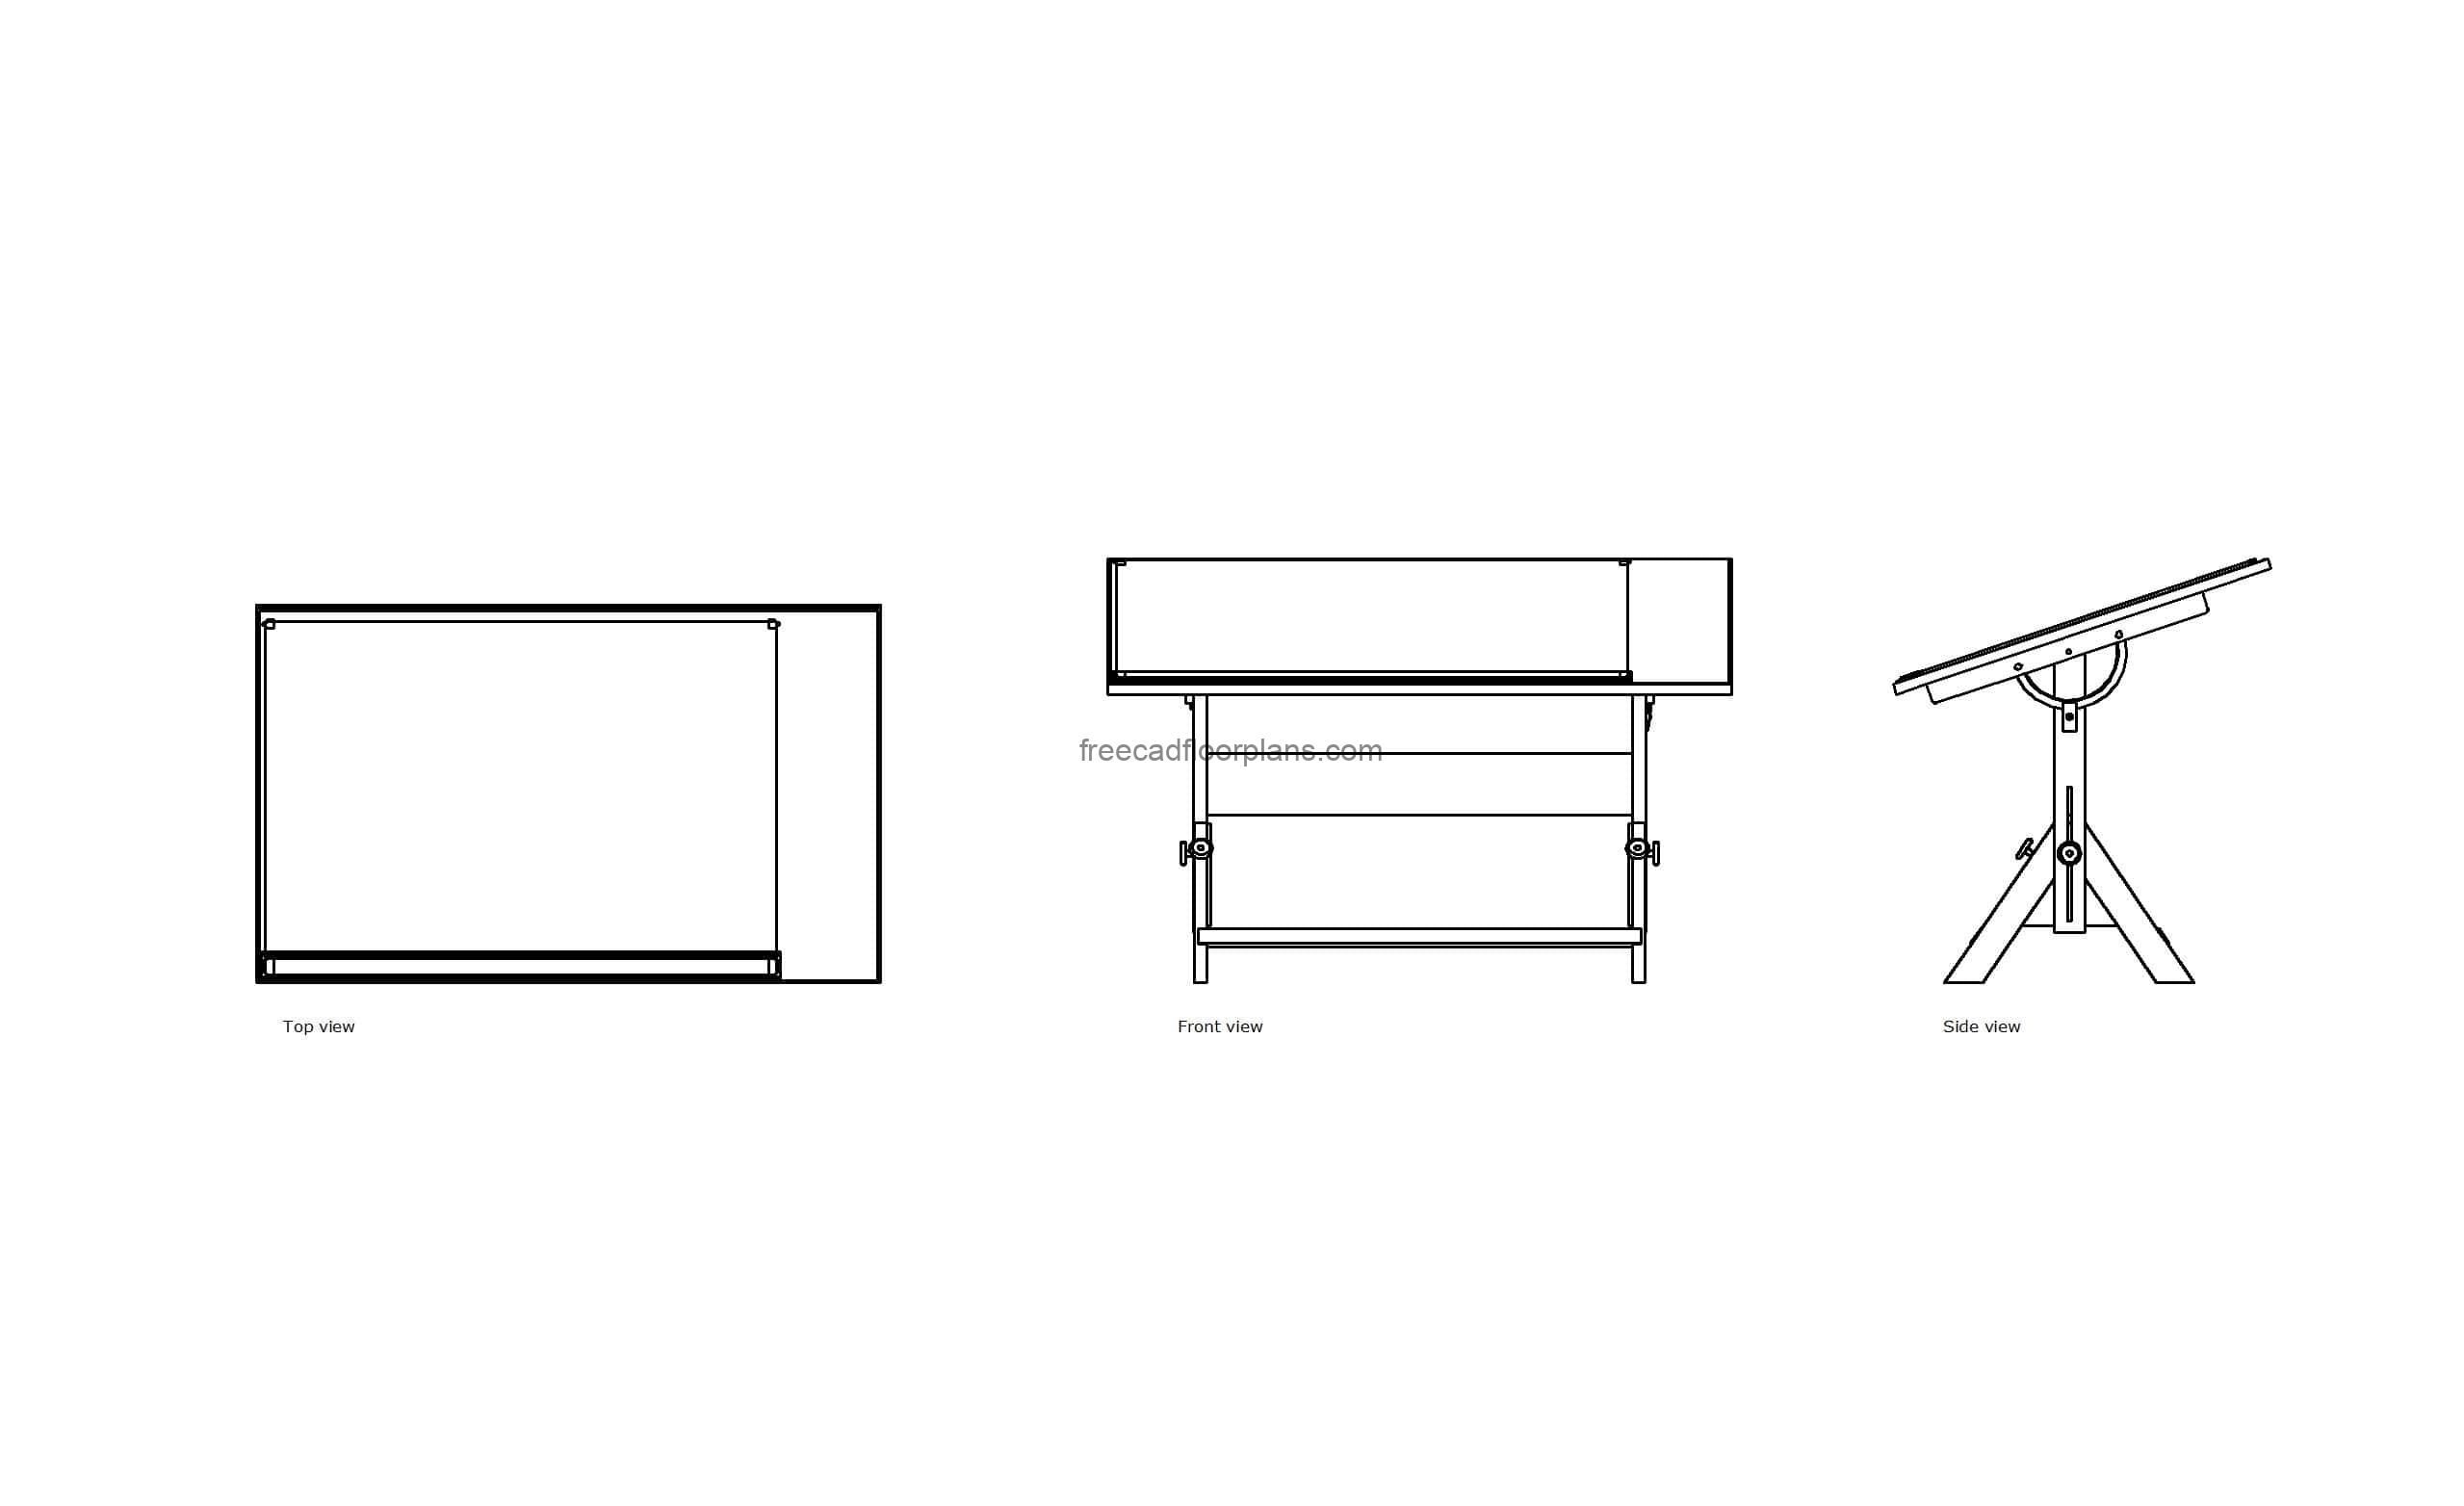 autocad drawing of a drafting table, 2d views plan and elevation dwg file free for download